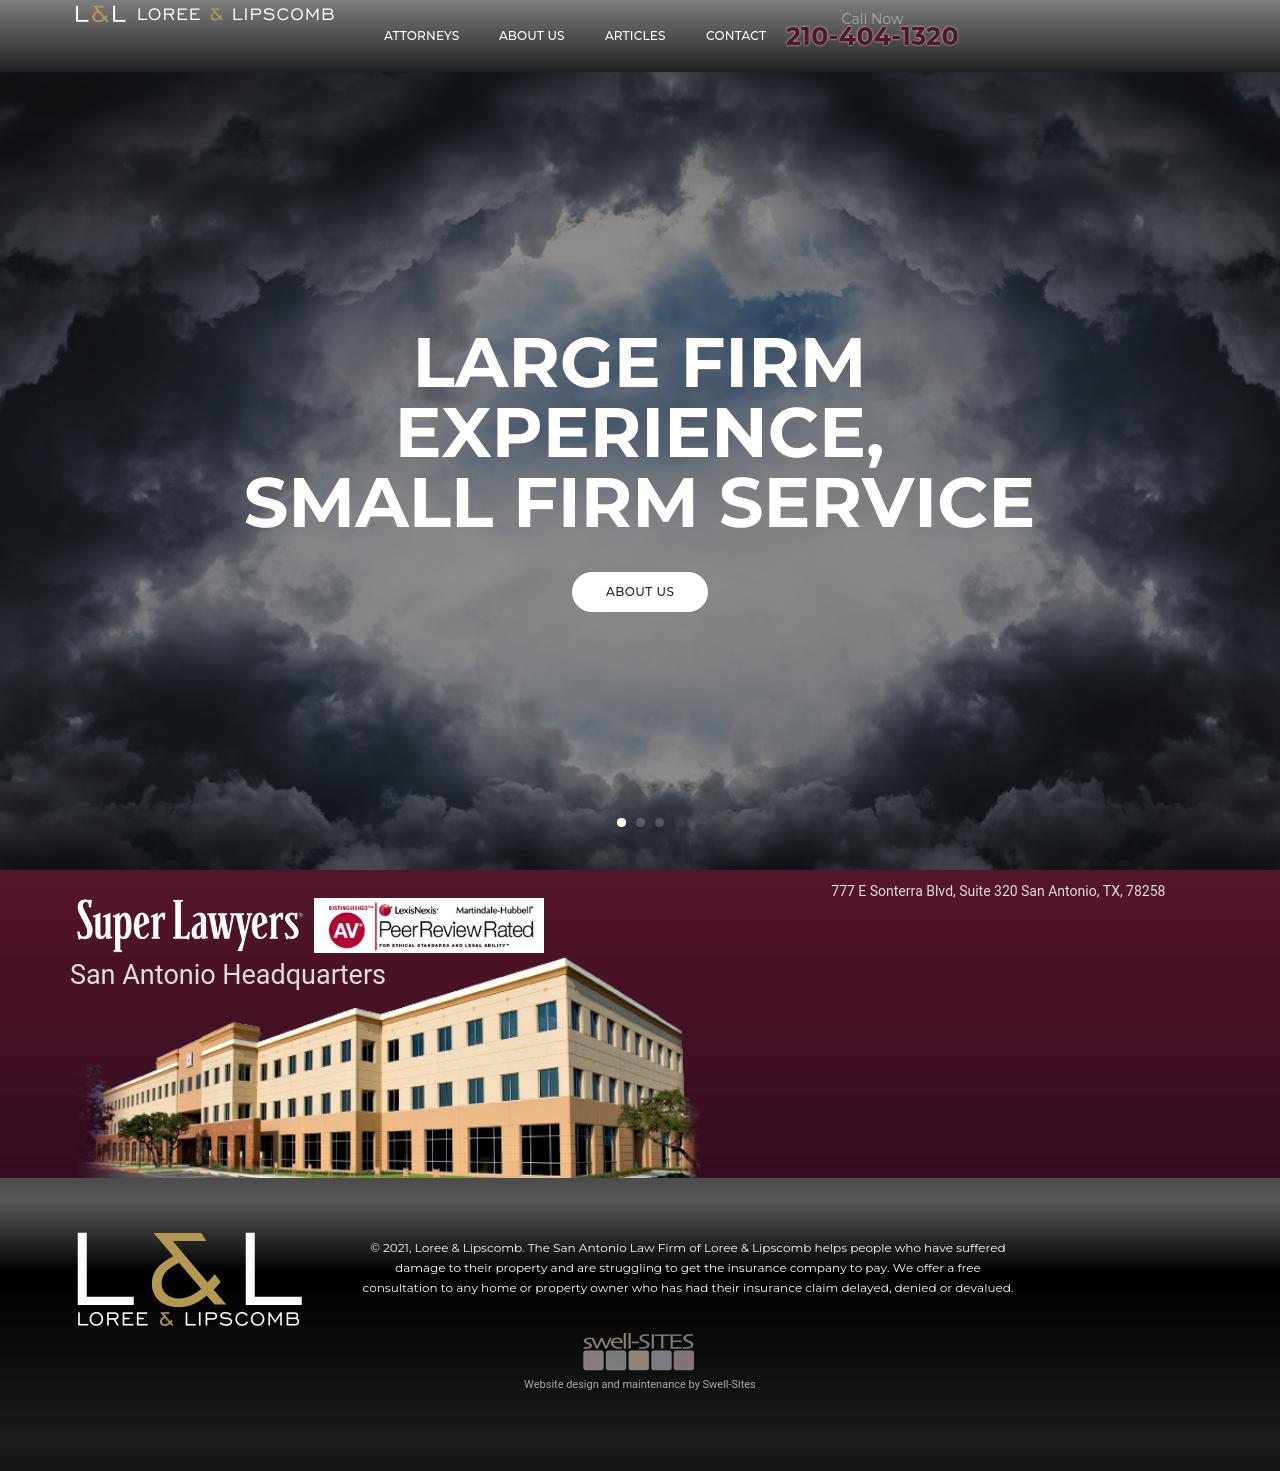 Loree & Lipscomb, Attorneys at Law - Centennial CO Lawyers